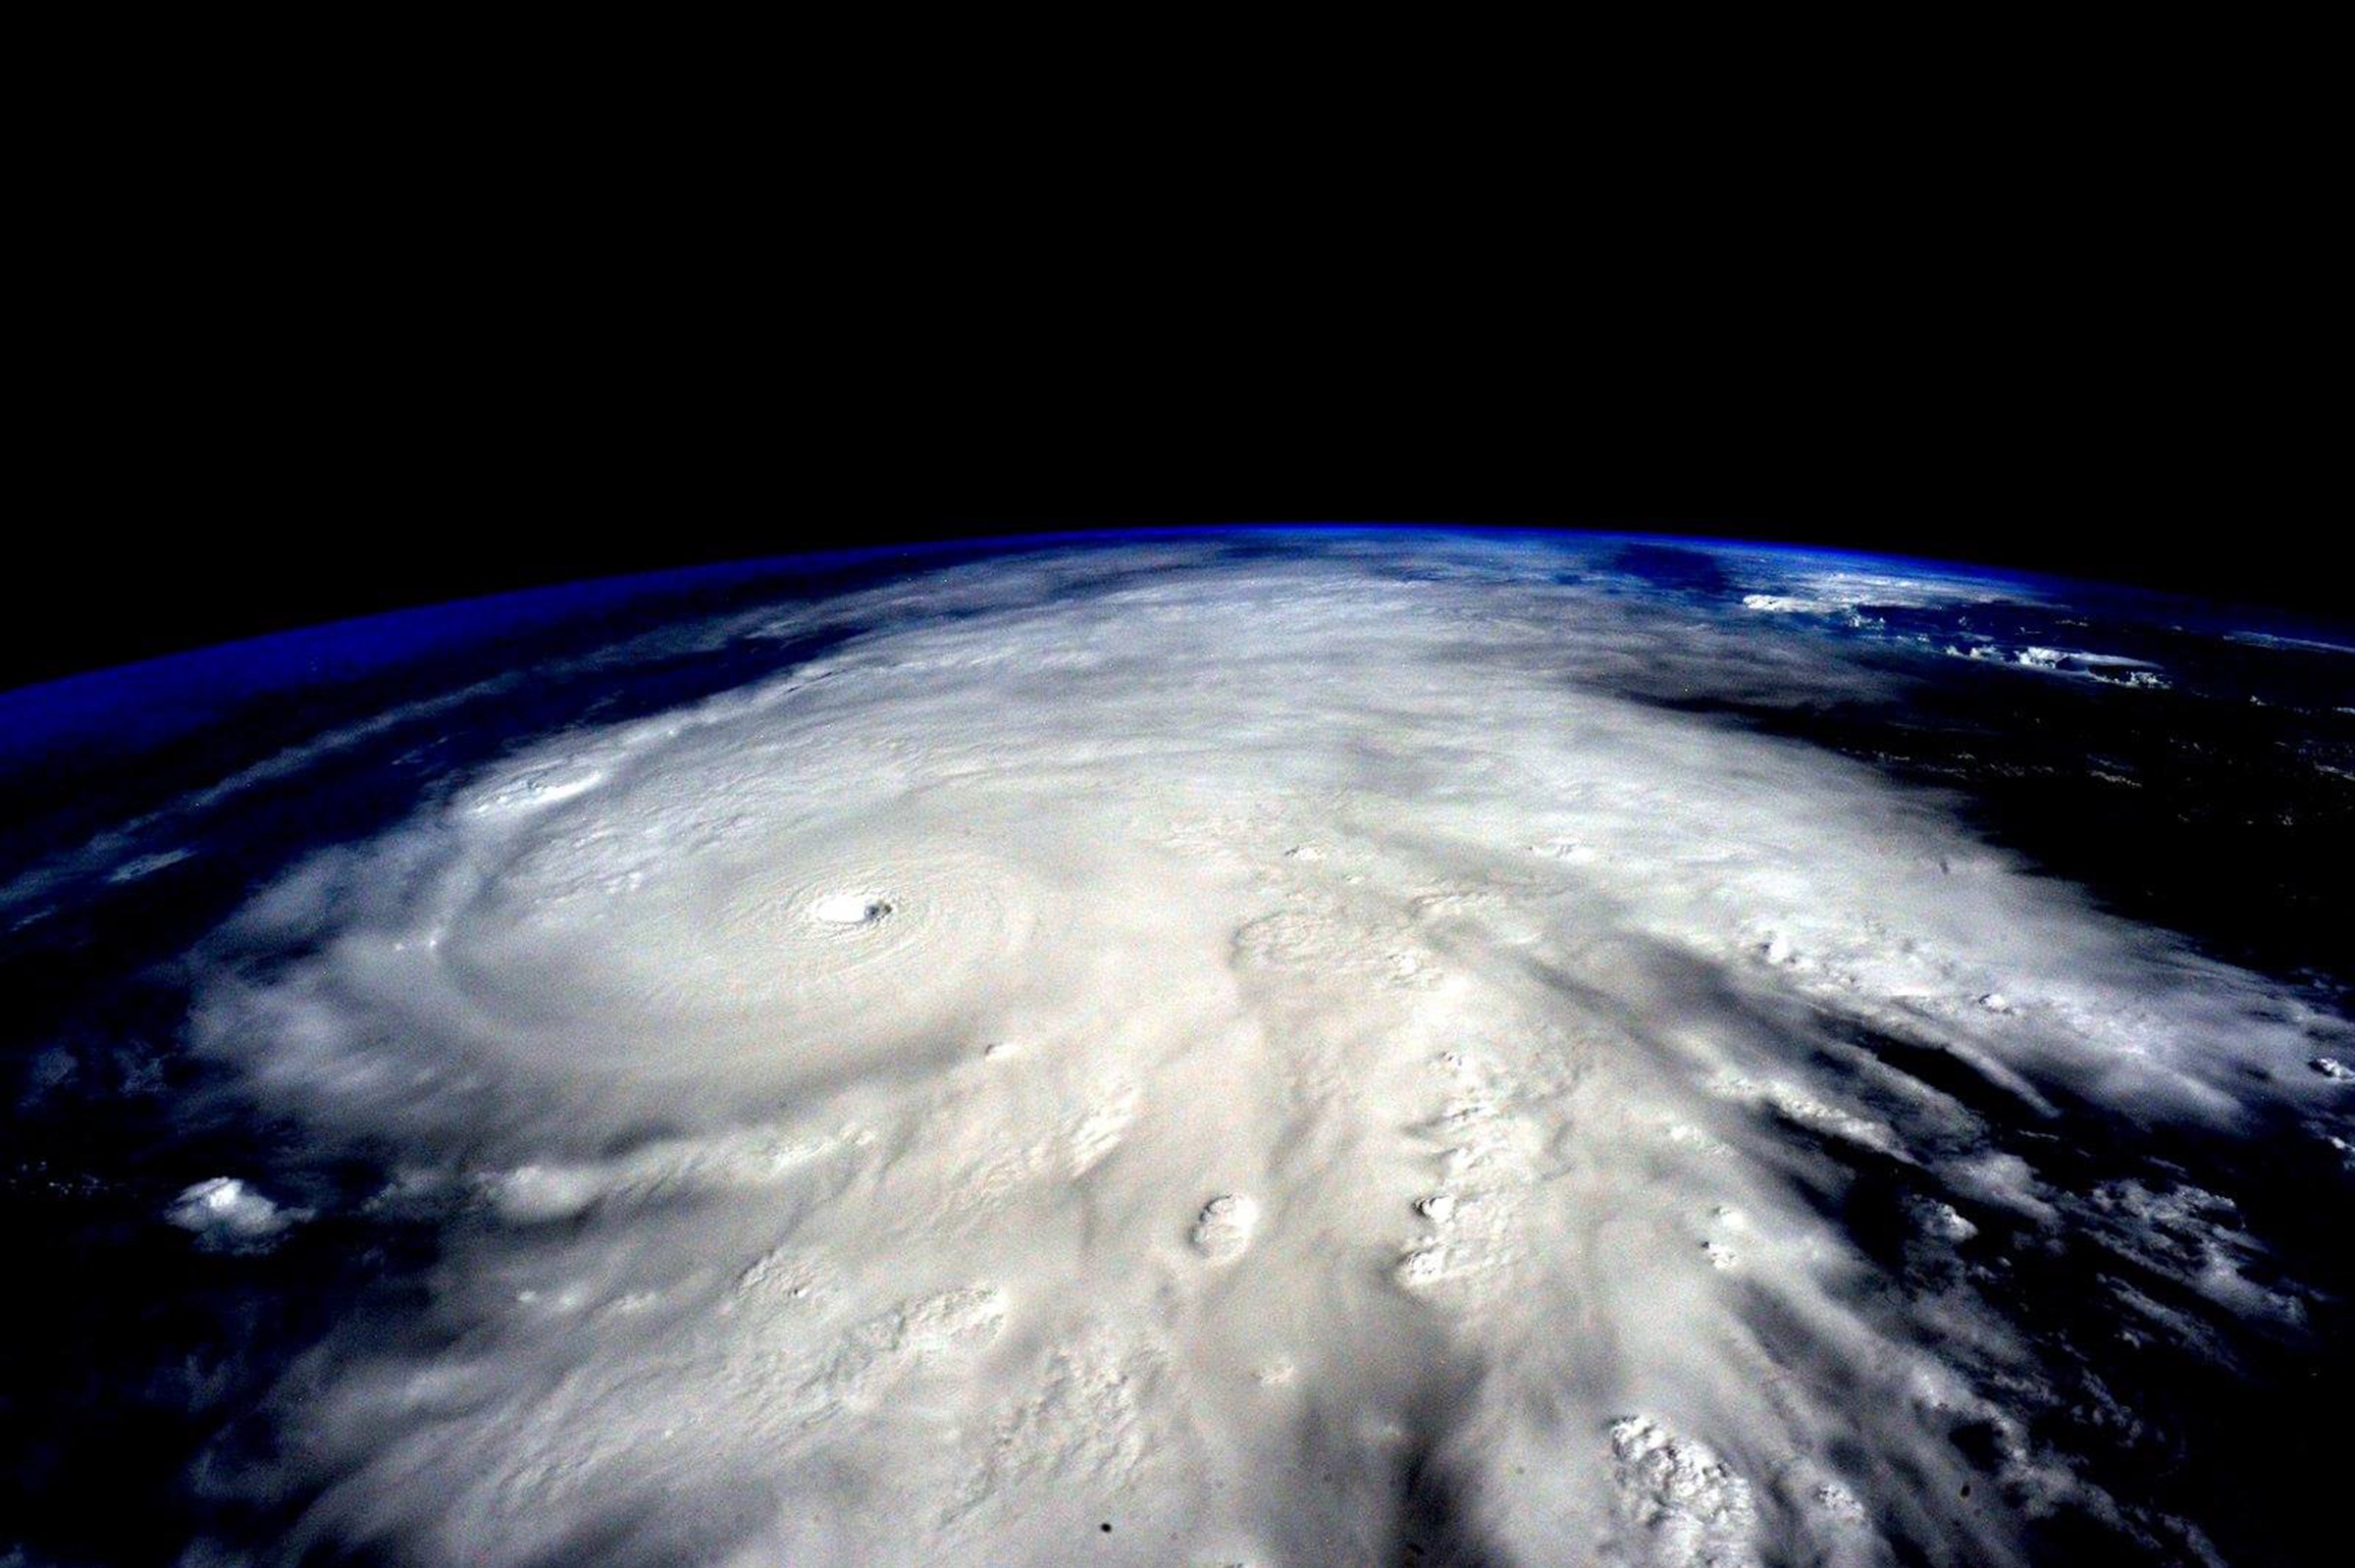 Hurricane Patricia is seen from the International Space Station. The hurricane made landfall on the Pacfic coast of Mexico on Oct. 23, 2015. (Scott Kelly/NASA—Getty Images)